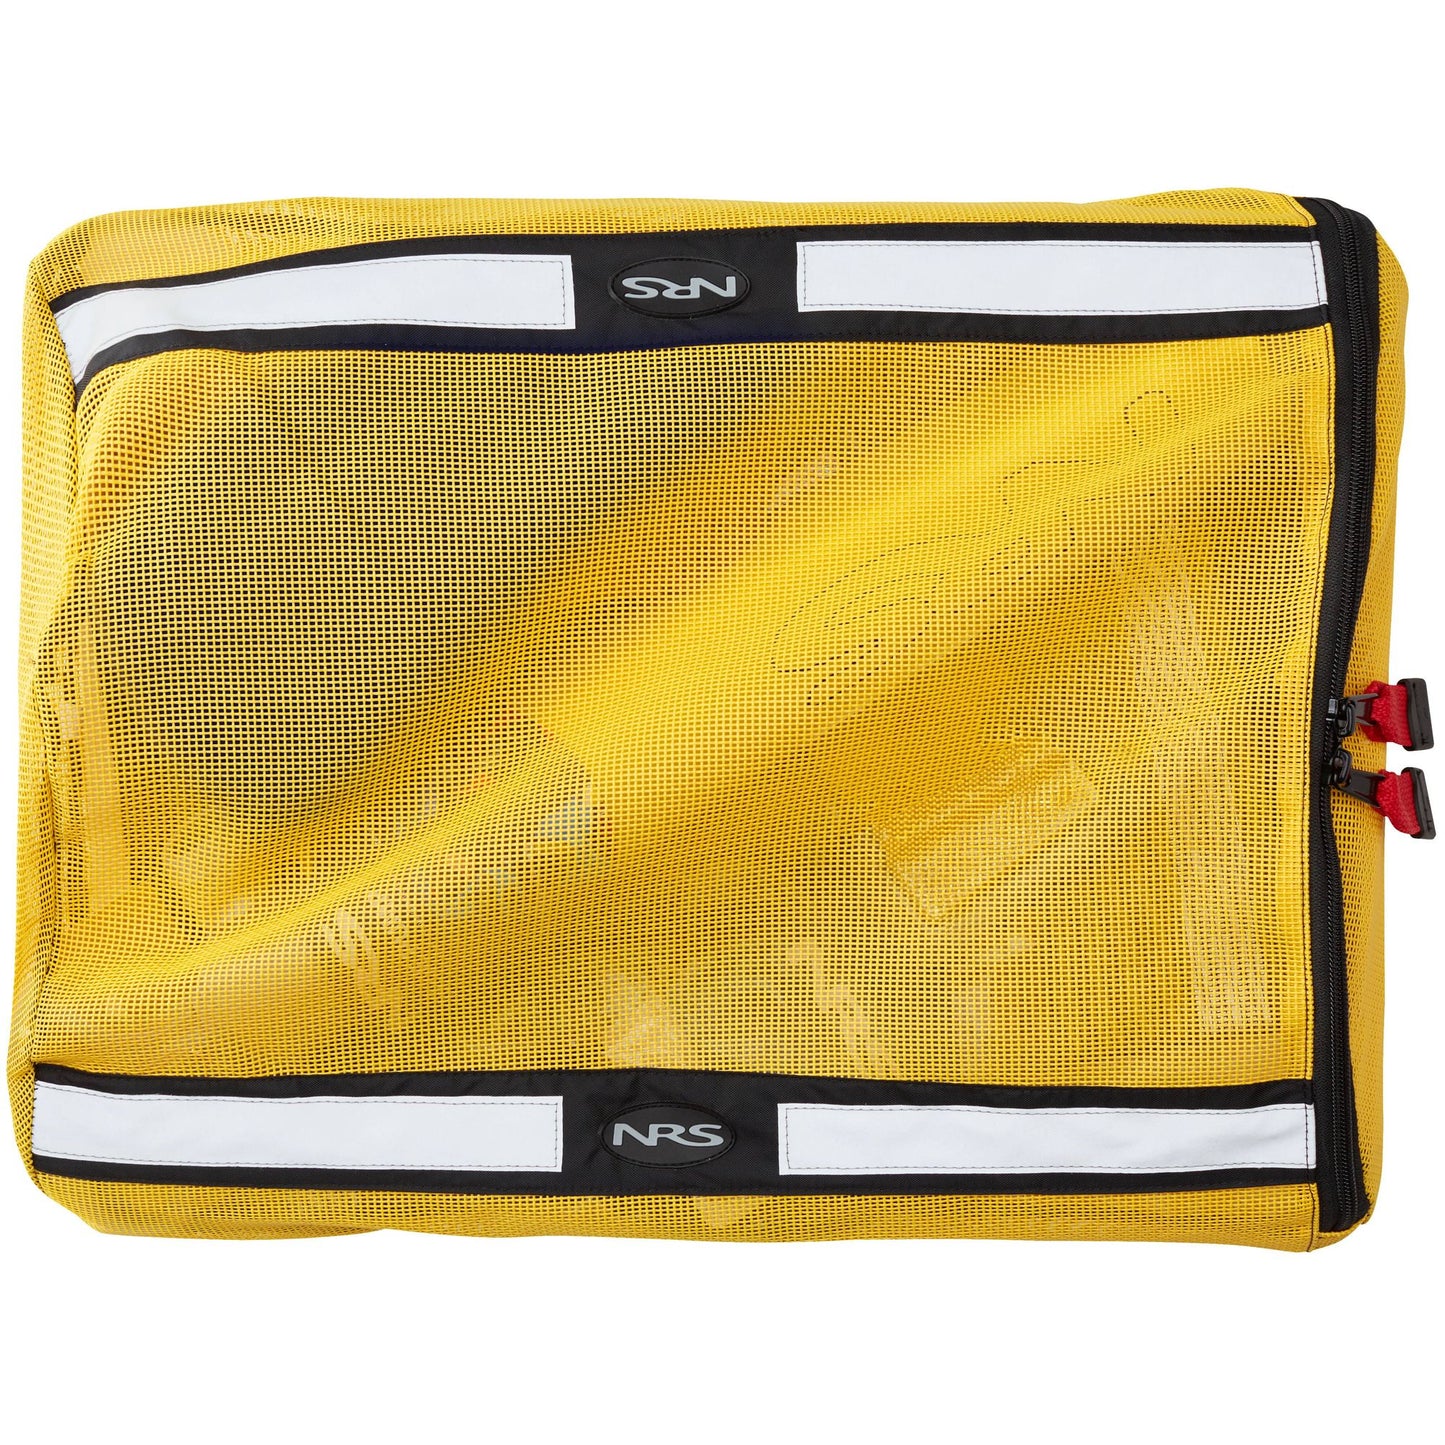 NRS Deluxe Touring Safety Kit, safety package